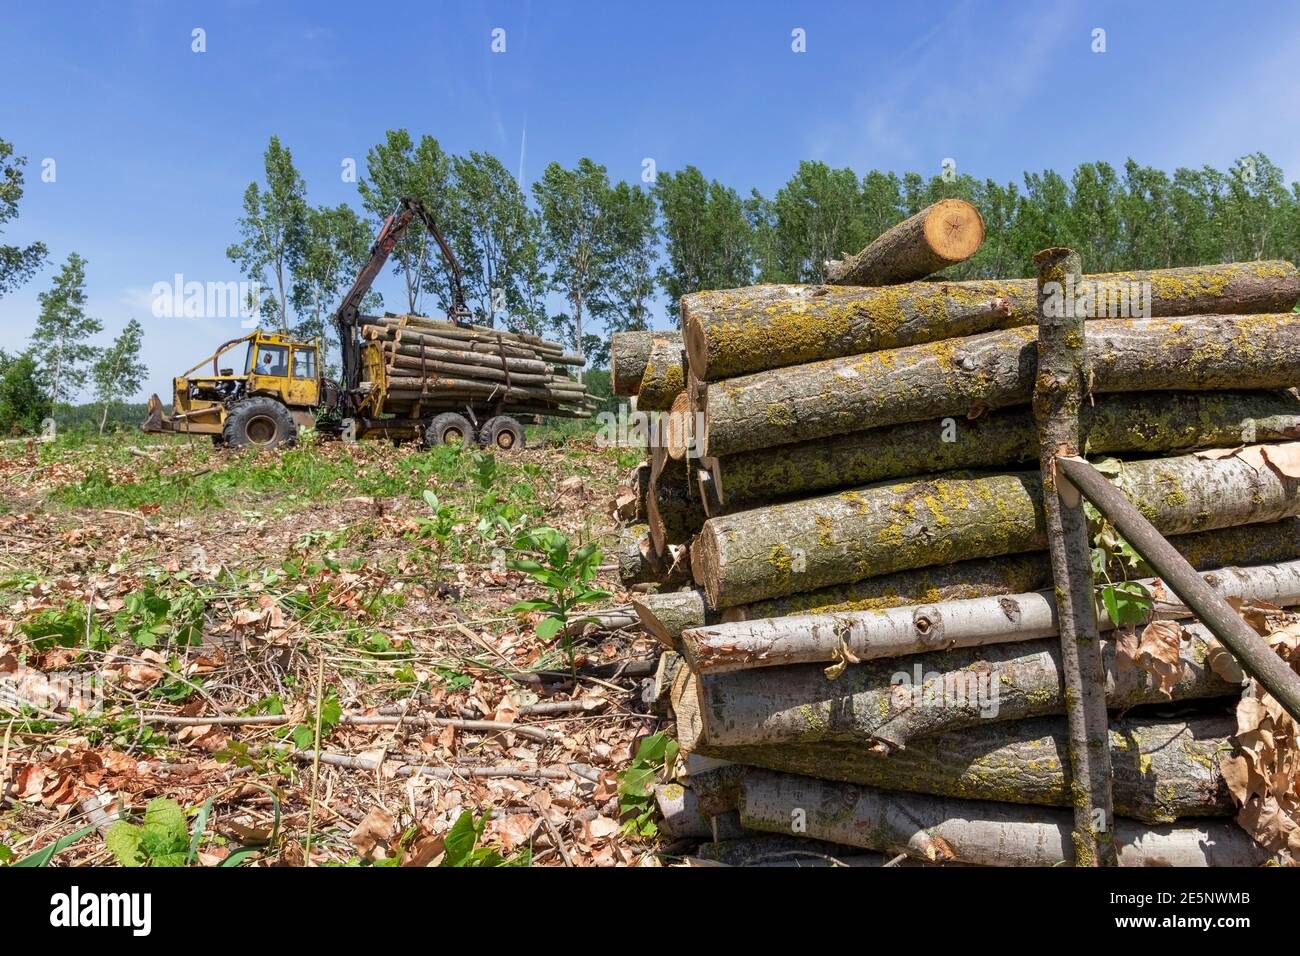 Timber Industry. Bundle Of Tree Logs In A Crane Grabber. Loading Tree Logs with Timber Crane on a Pile. Lumber Industry and Impact on the Environment. Stock Photo